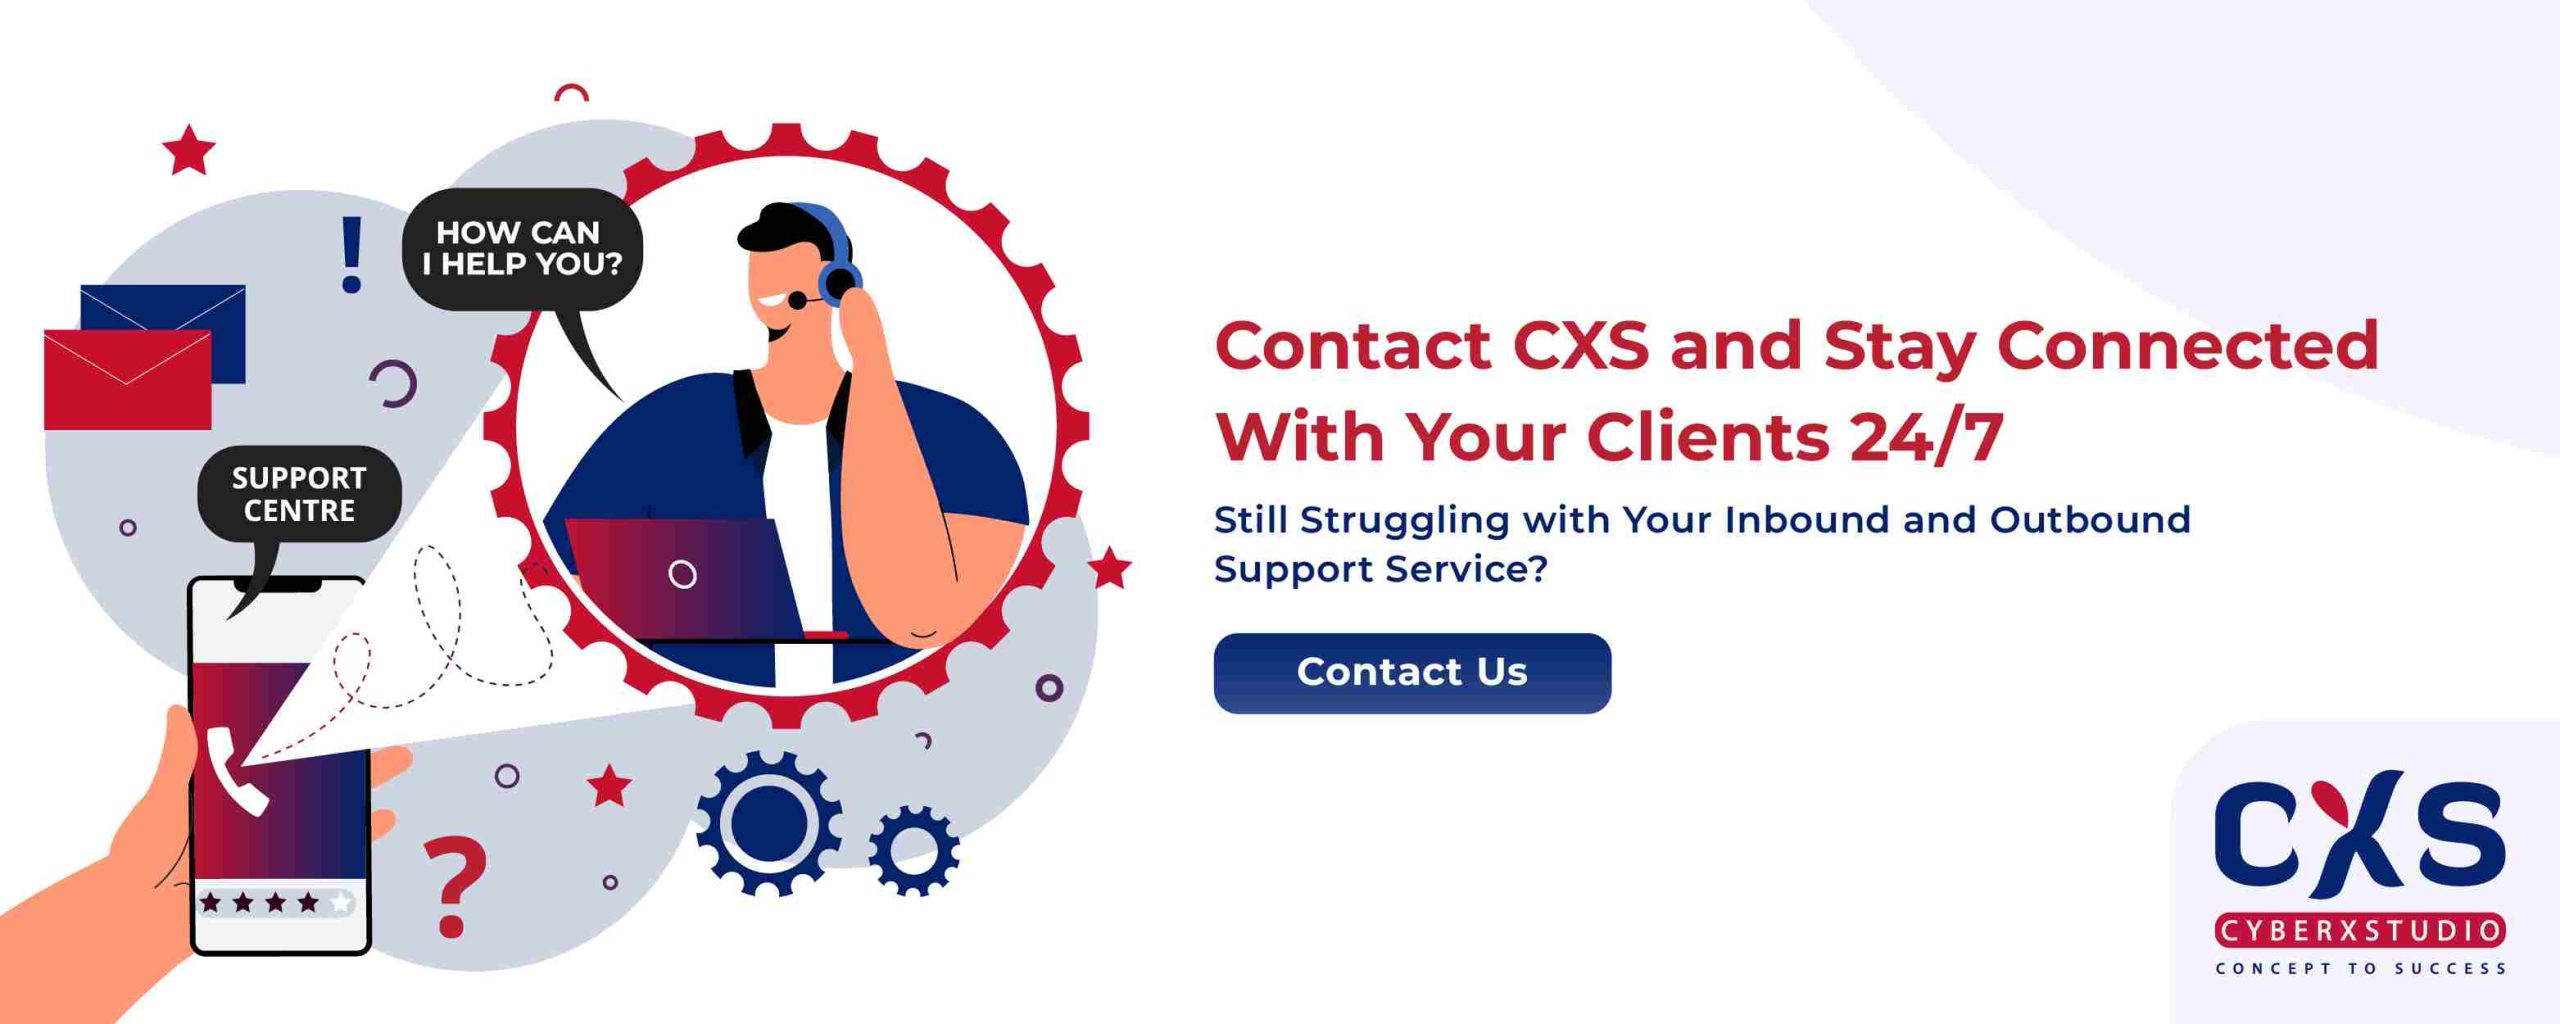 Contact CXS and Stay Connected With Your Clients 24/7